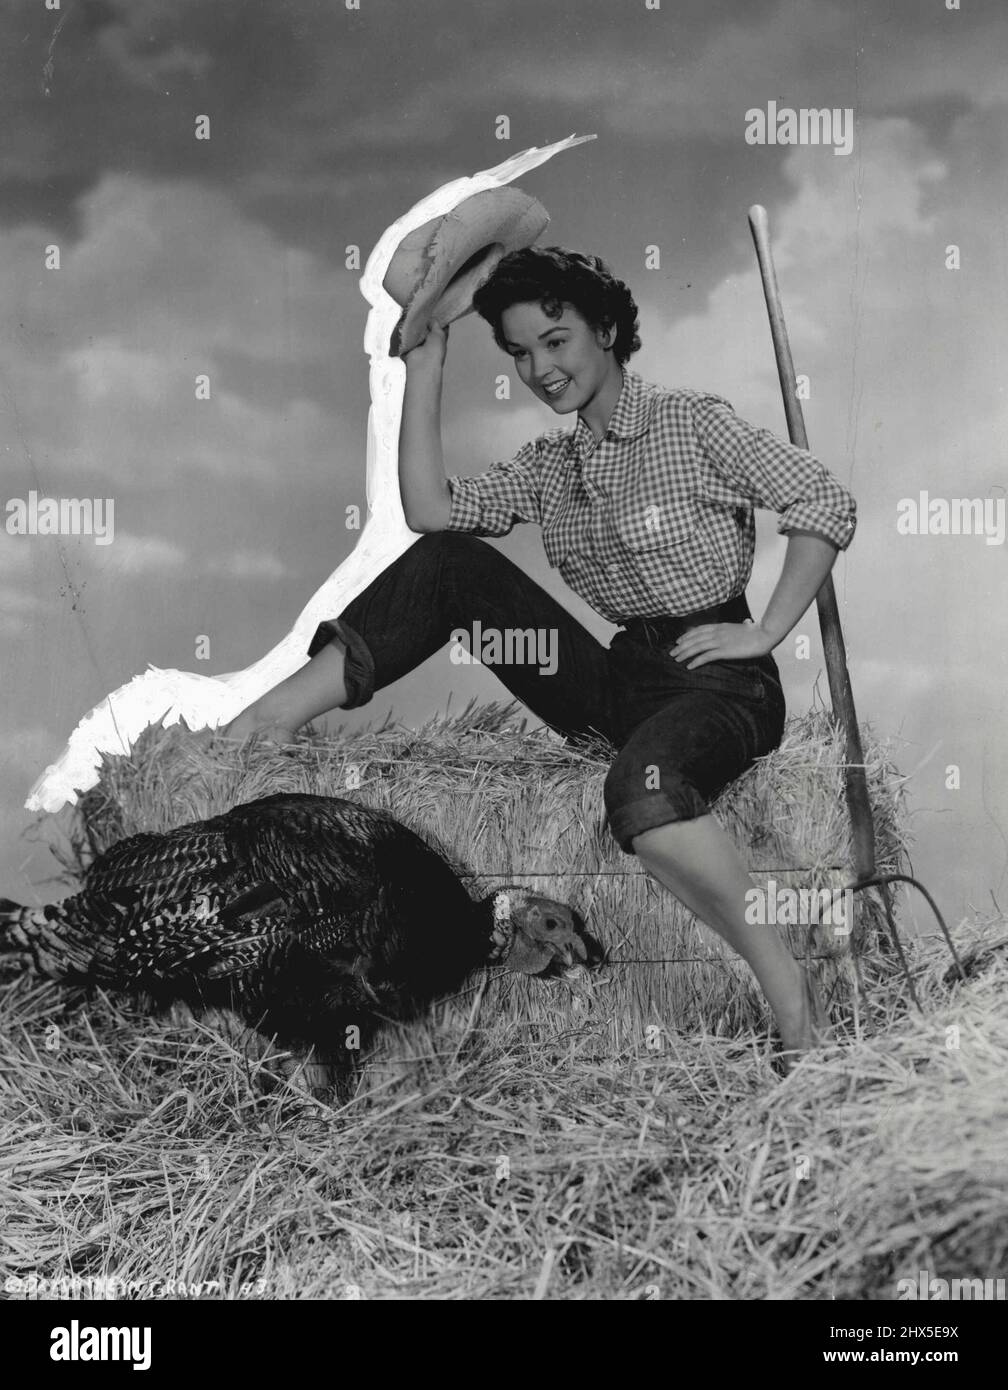 Take Heart, All you Turkeys - Xmas can be a happy time even for a turkey if he is as lucky as this bird. Columbia starlet, Kathryn Grant, currently being seen in '5 Against the House', is realy making the last hours pleasant for the gobbler before he graces her Thanksgiving board. December 13, 1955. Stock Photo